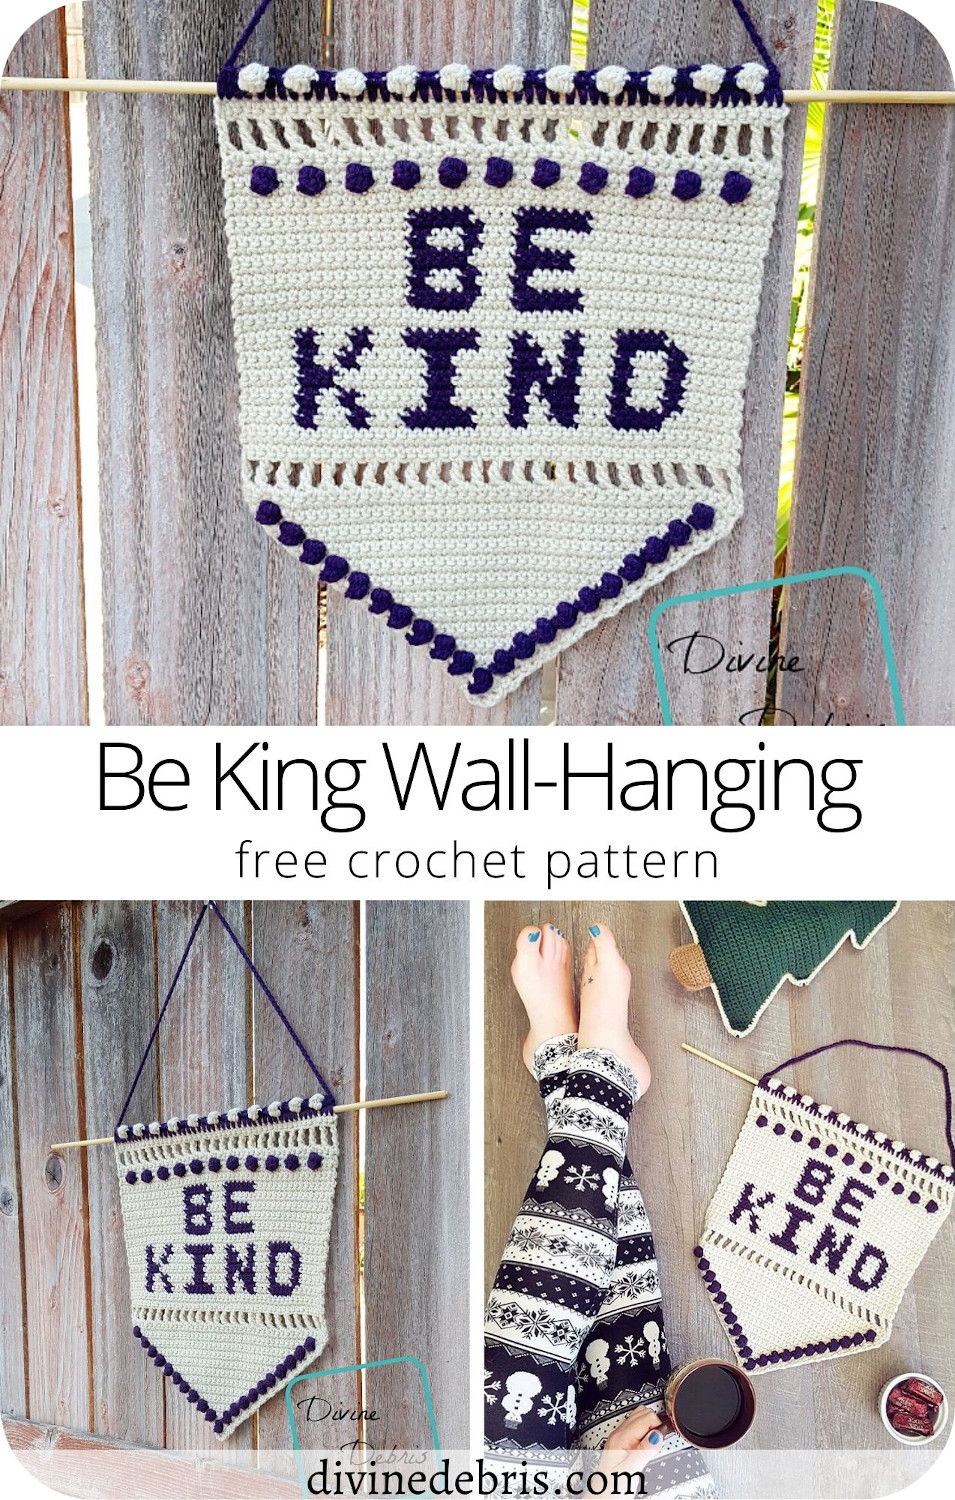 Remember that kindness costs you nothing with the Be Kind Wall-Hanging, an easy and fun tapestry crochet pattern from by DivineDebris.com